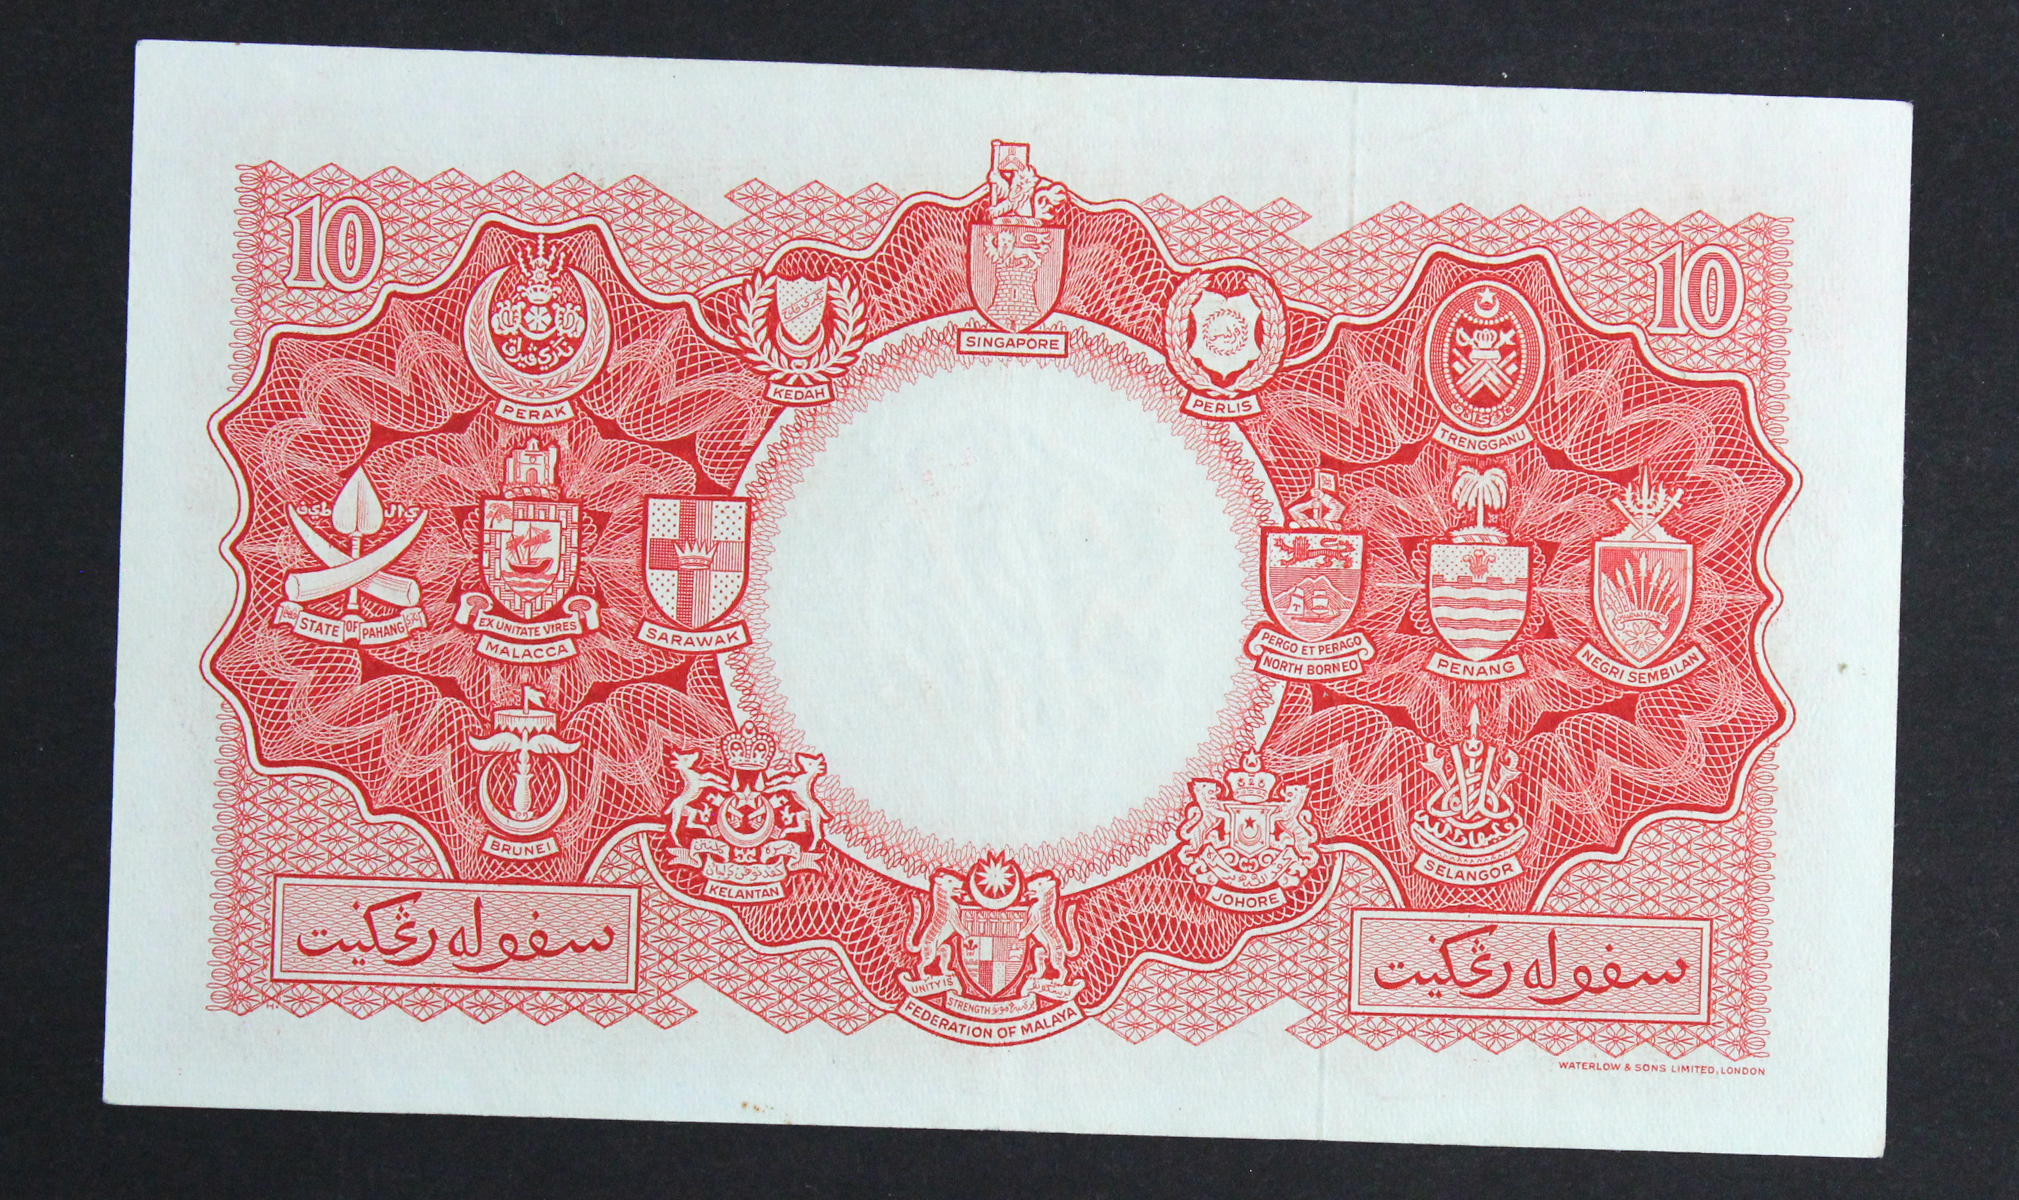 Malaya & British Borneo 10 Dollars dated 21st March 1953, serial A/14 870768 (TBB B103a, Pick3a) - Image 2 of 2